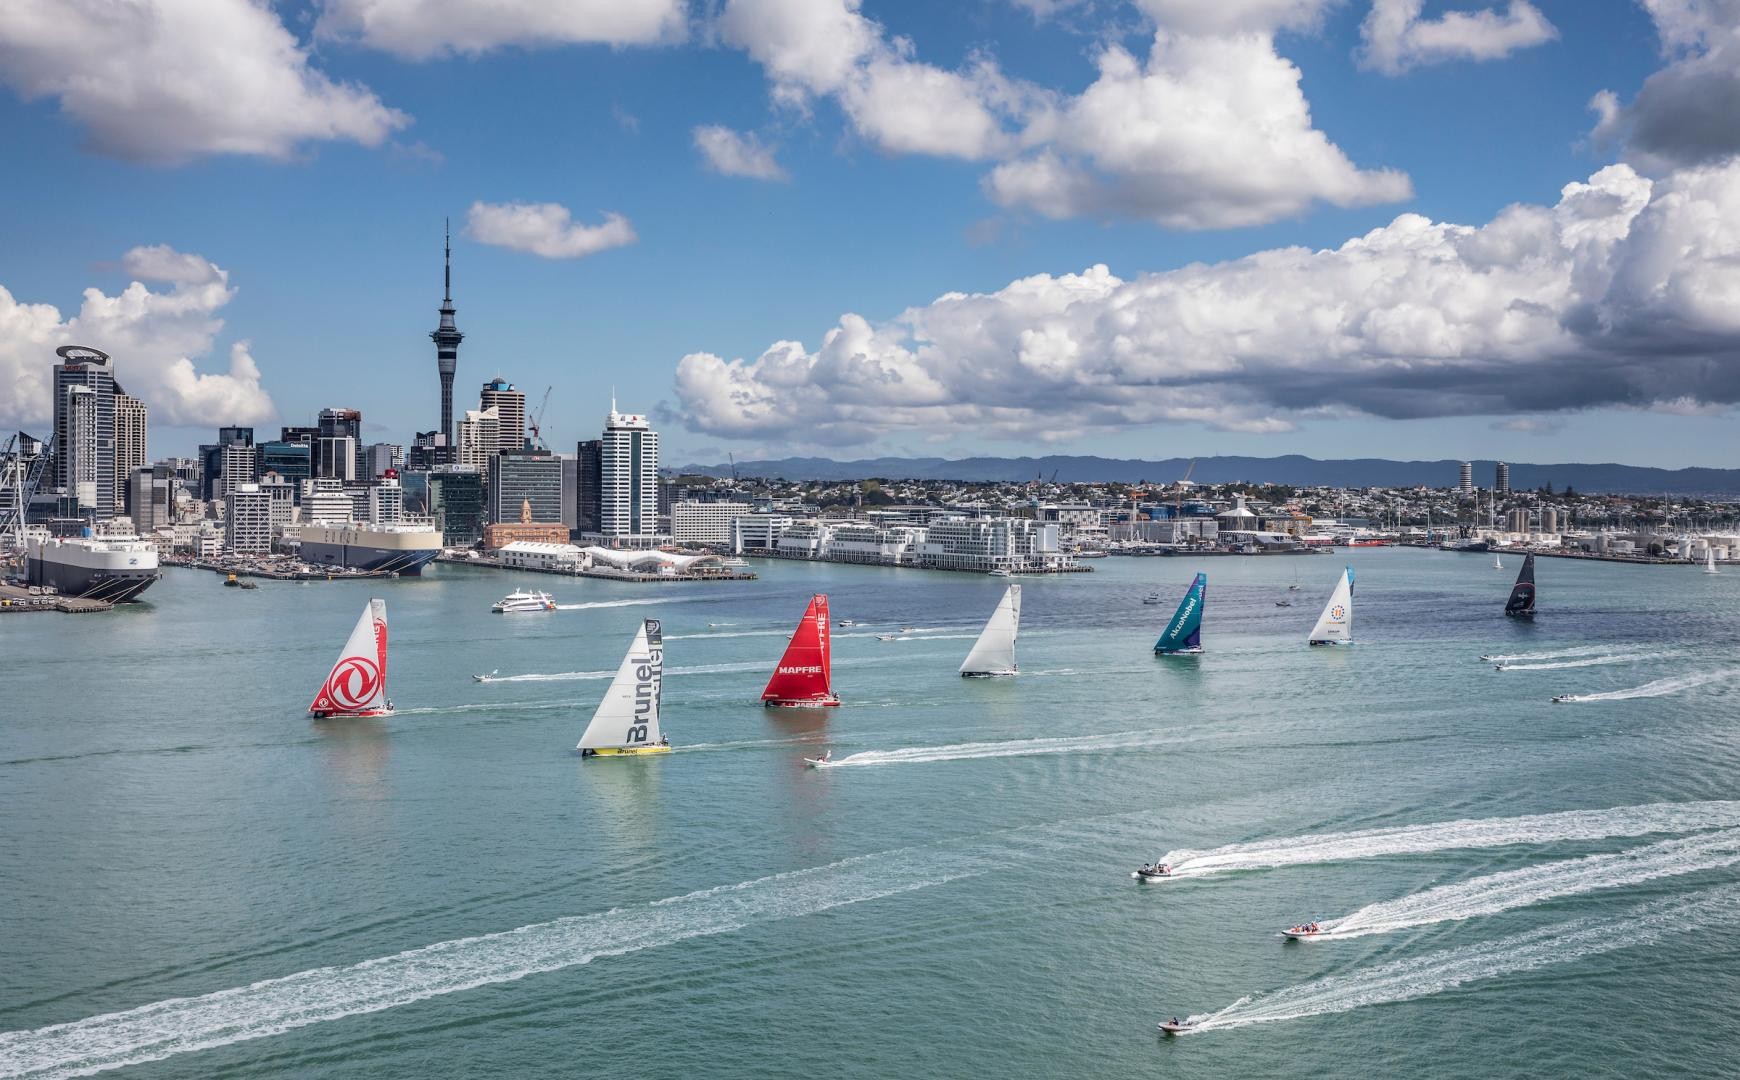 The Ocean Race confirms its return to Auckland, New Zealand